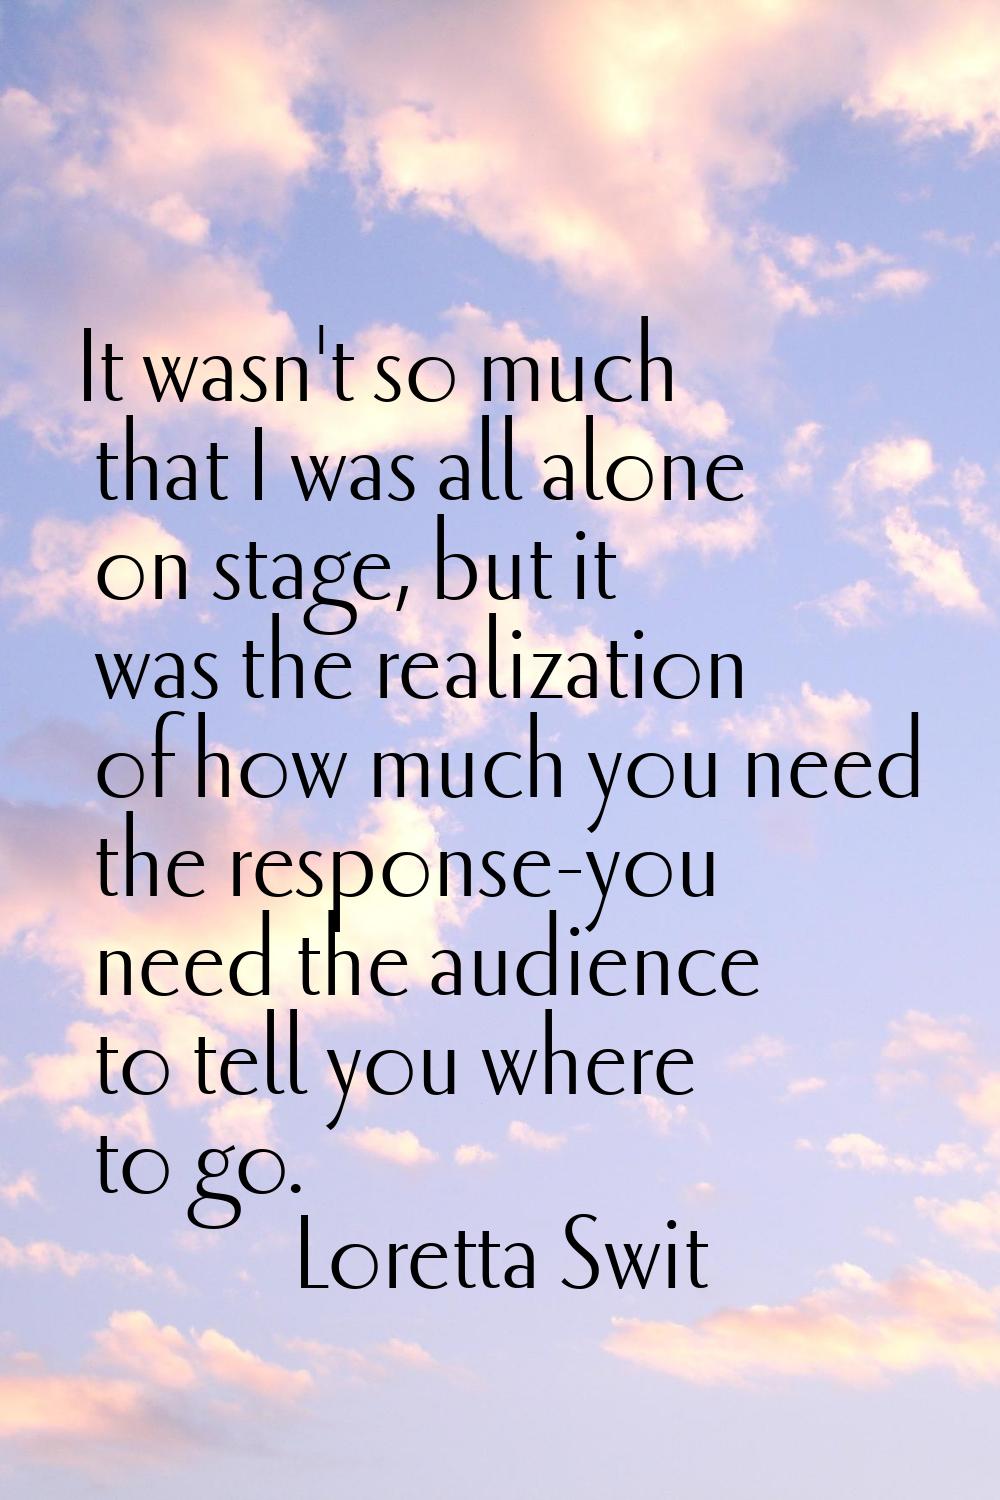 It wasn't so much that I was all alone on stage, but it was the realization of how much you need th